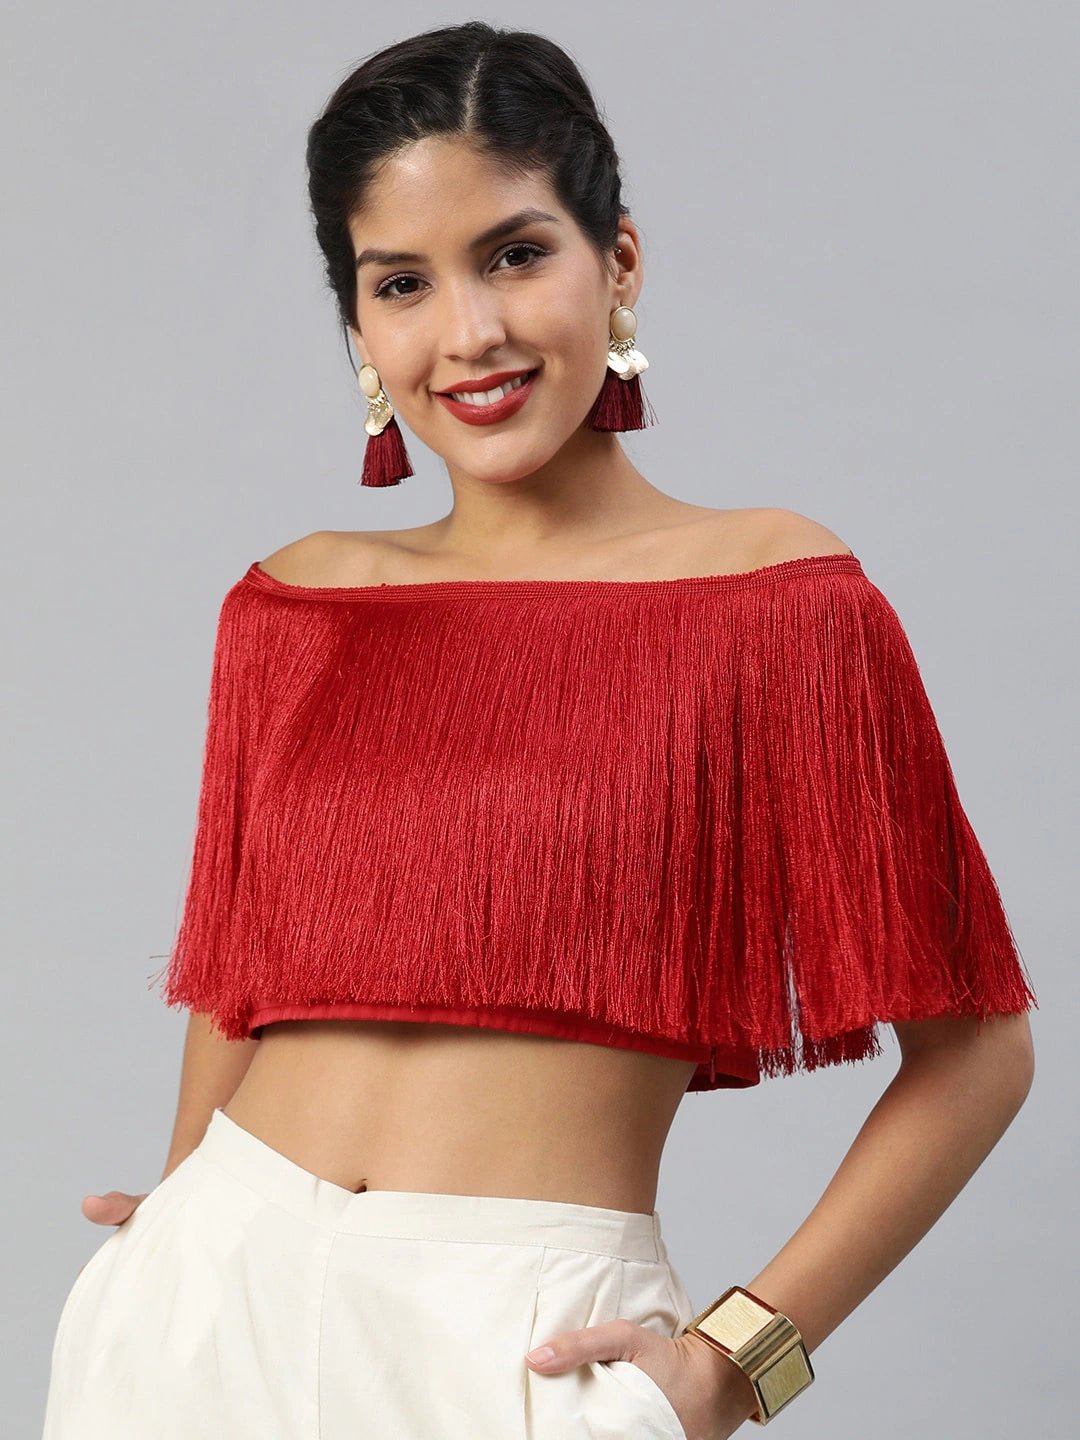 Crop Shirt - Best Offers on Cropped Shirts Online at Myntra